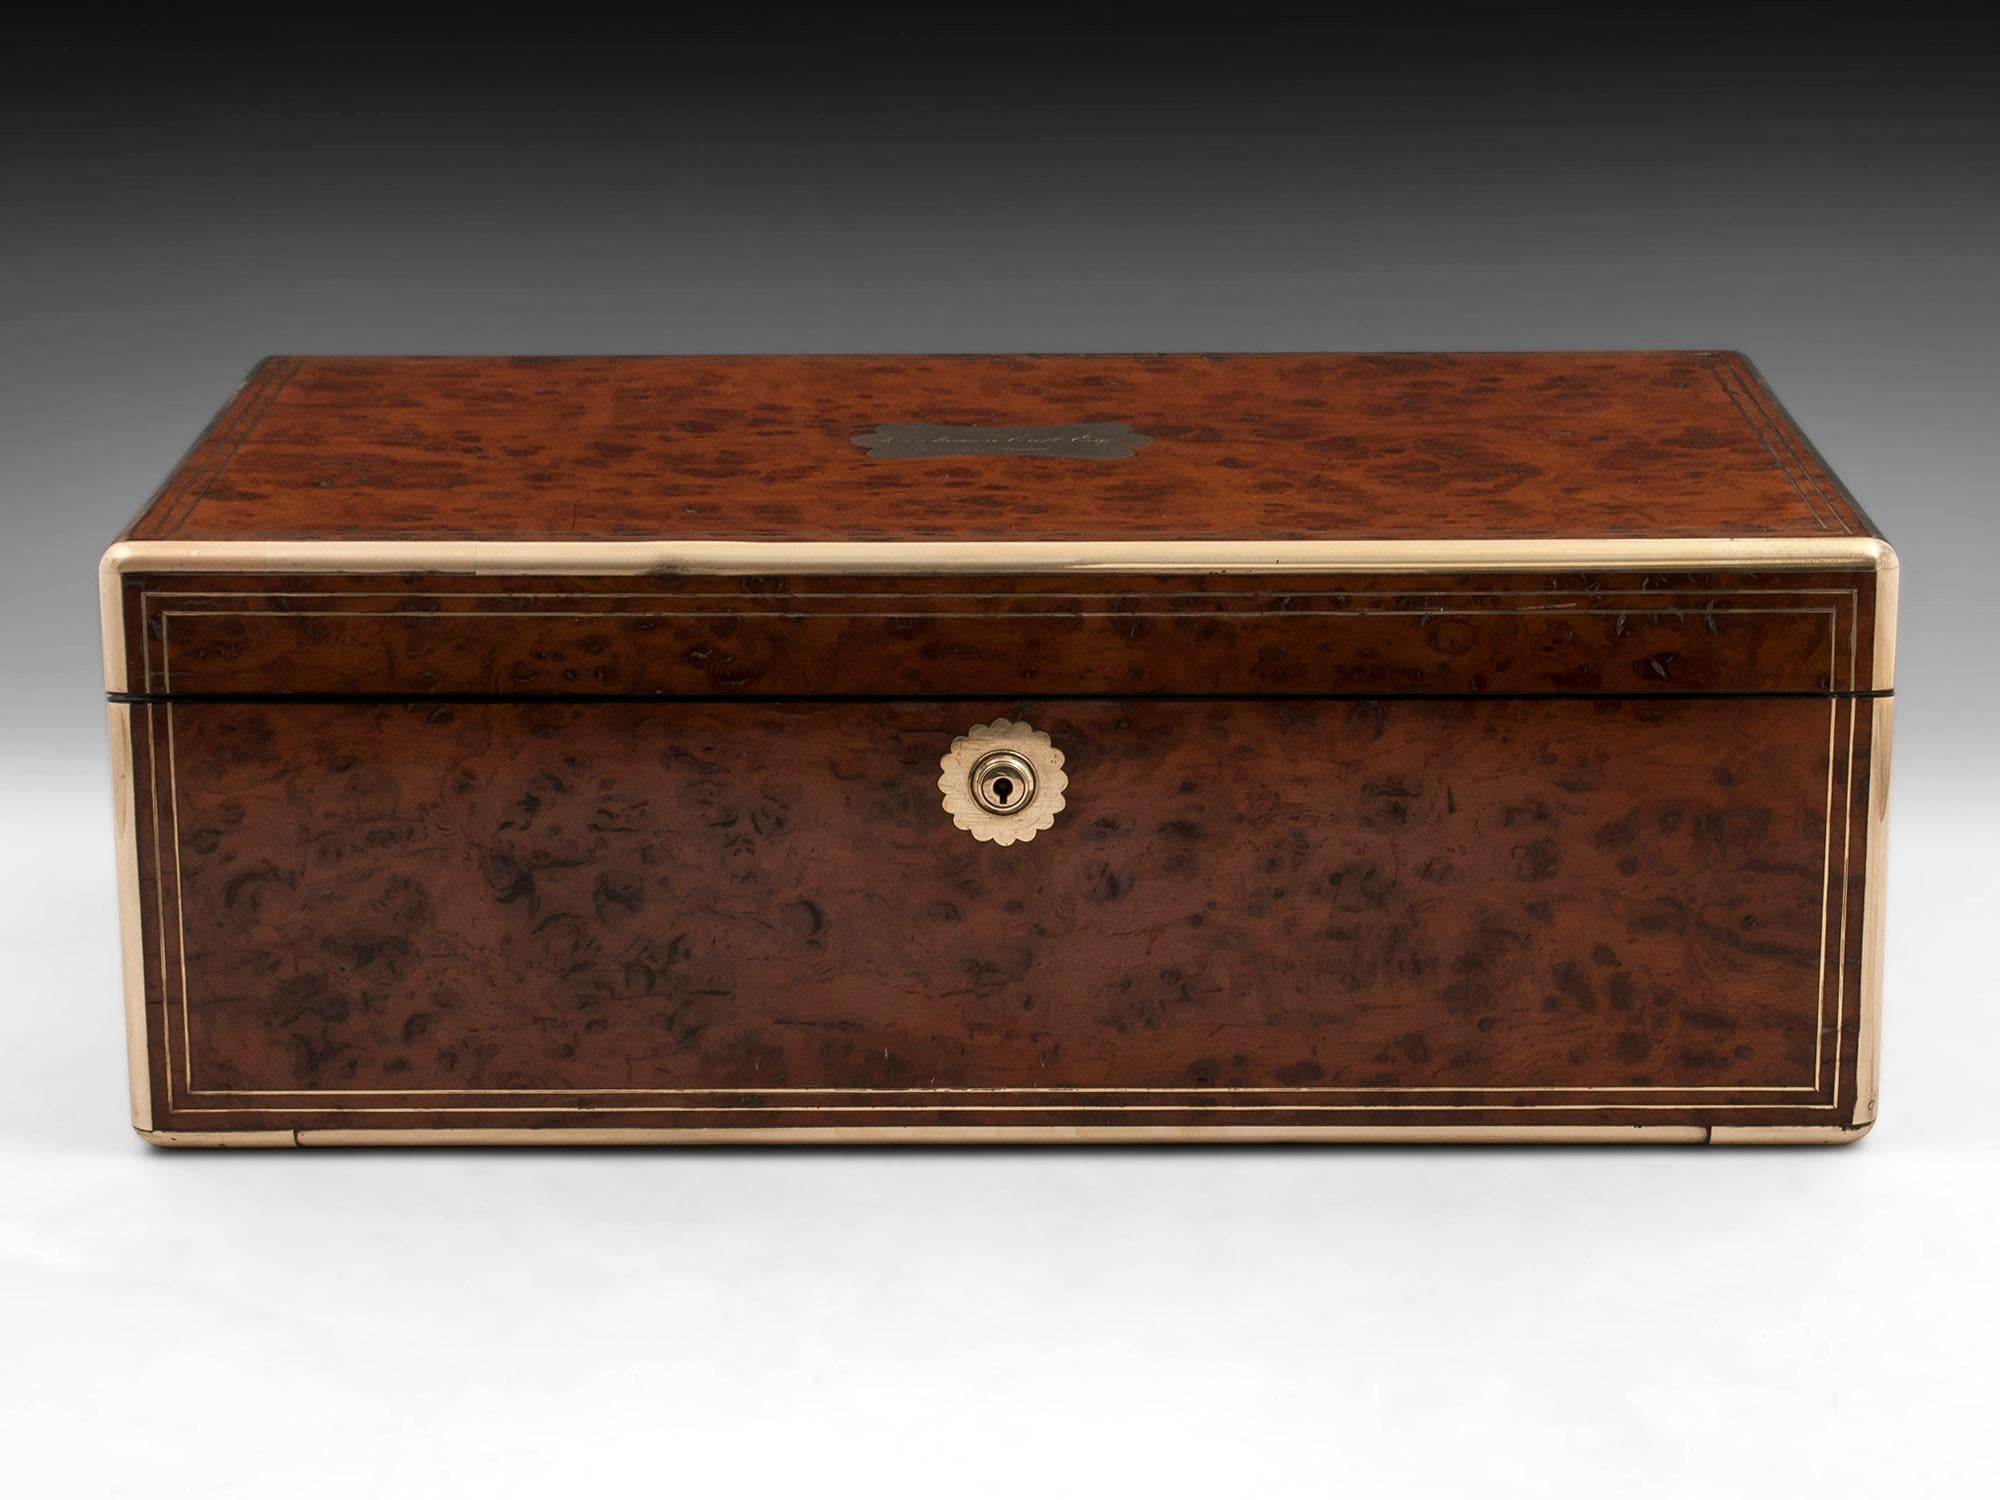 Antique brass bound writing box veneered in stunning pollard oak, with double strung brass, flush fitting campaign style handles and a large ornate initial plate engraved: John Ianson Croft Esq. In testimony of regard. This fabulous writing box is